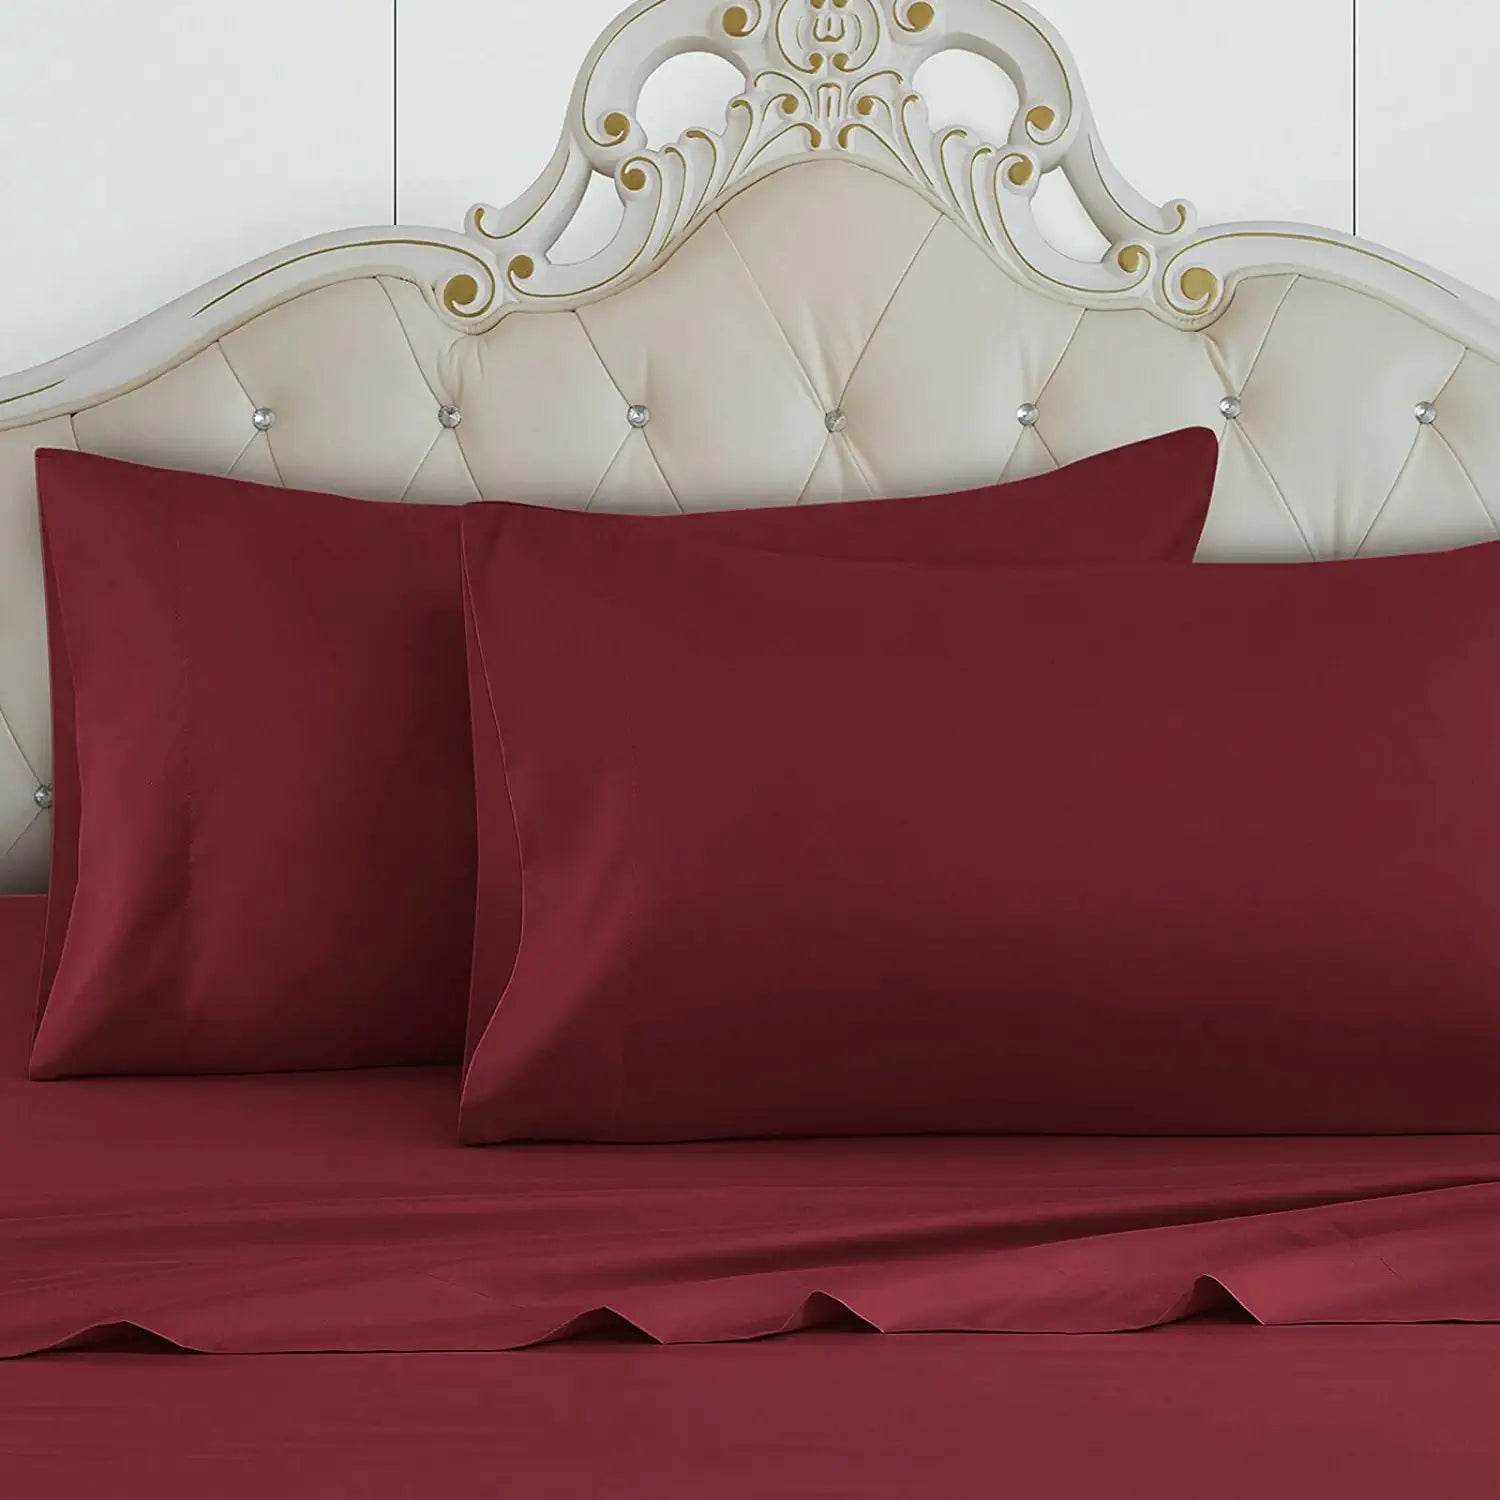 Buy 1000-TC Stripe Sheet Set Red Wine 100% Egyptian Cotton at- Egyptianhomelinens.com